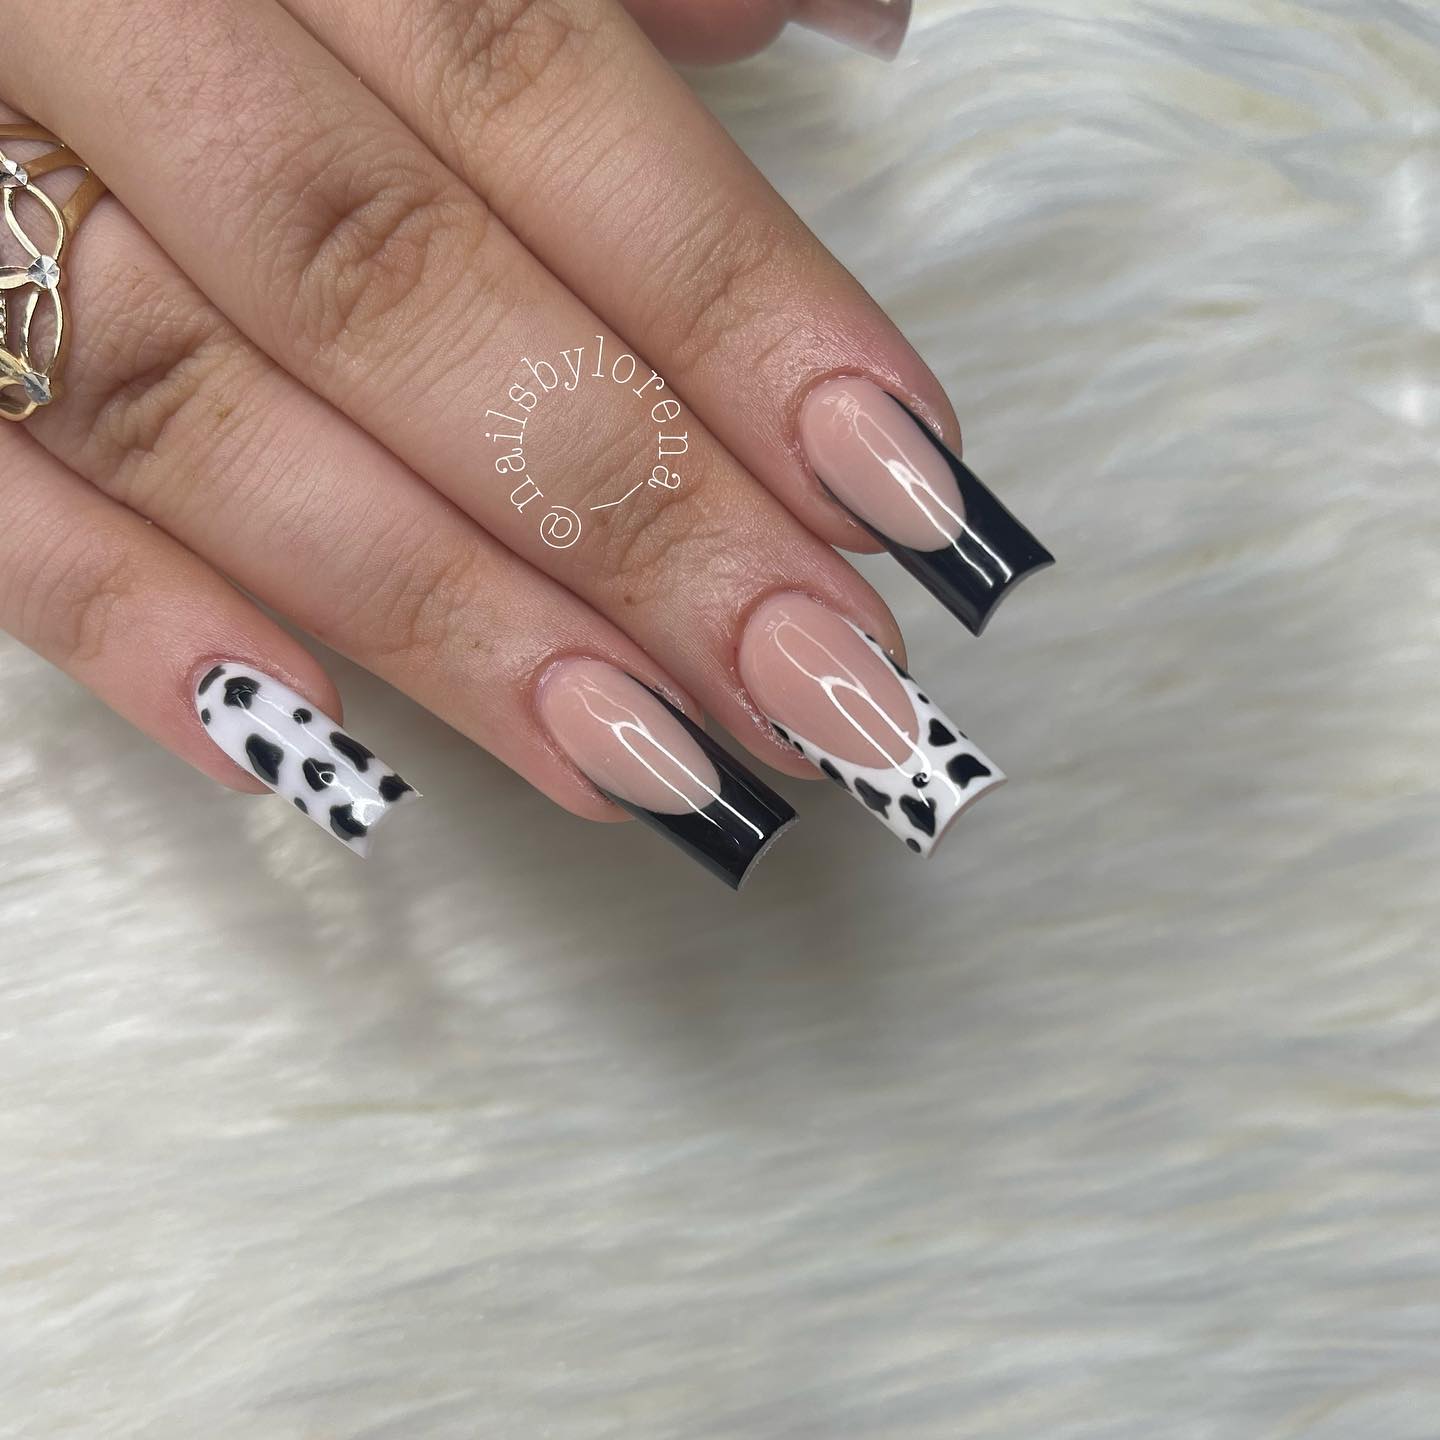 Long an square manicure is best combined with French tips. Typical white French tips are sometimes boring, so why don't go for cow print and black tips?